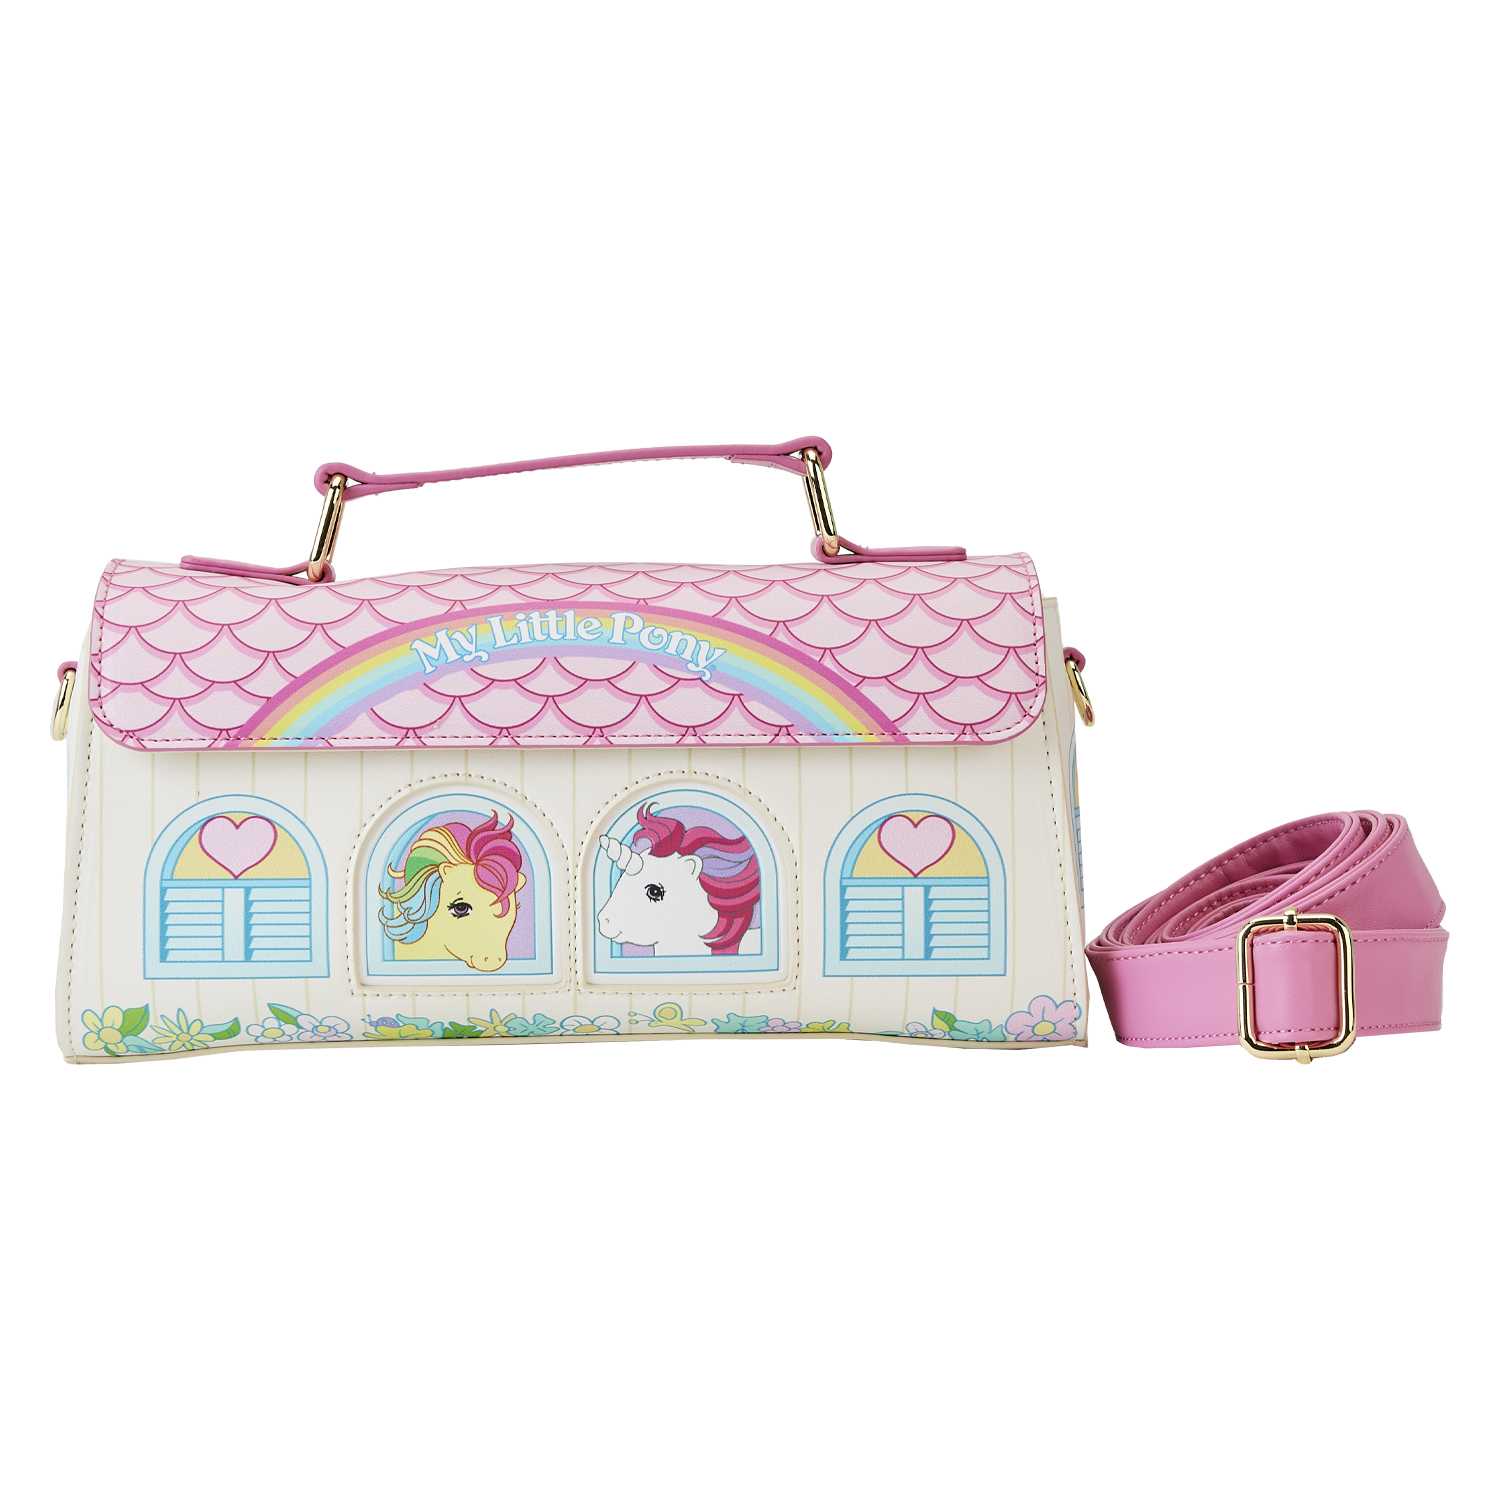 Loungefly my little pony sac a main juillet 23